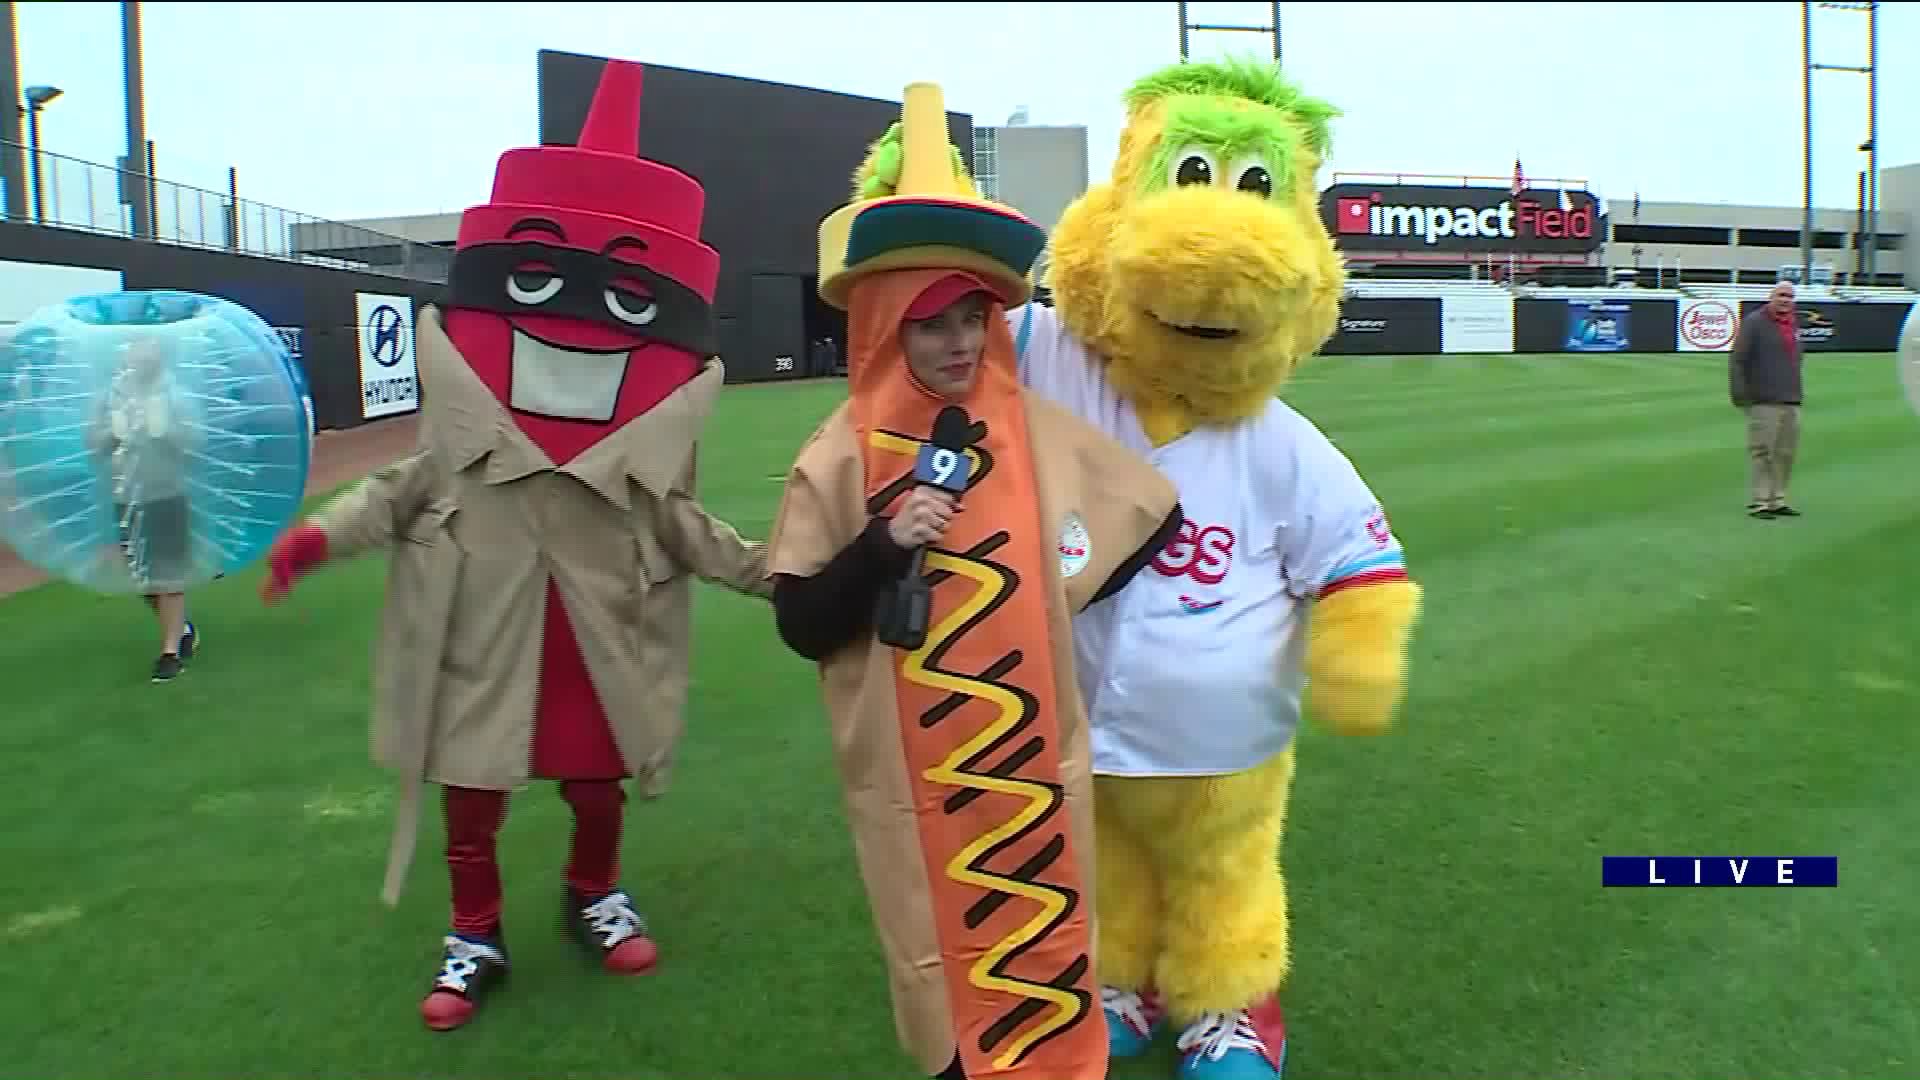 Around Town visits Impact Field prior to the Chicago Dogs Home Opener